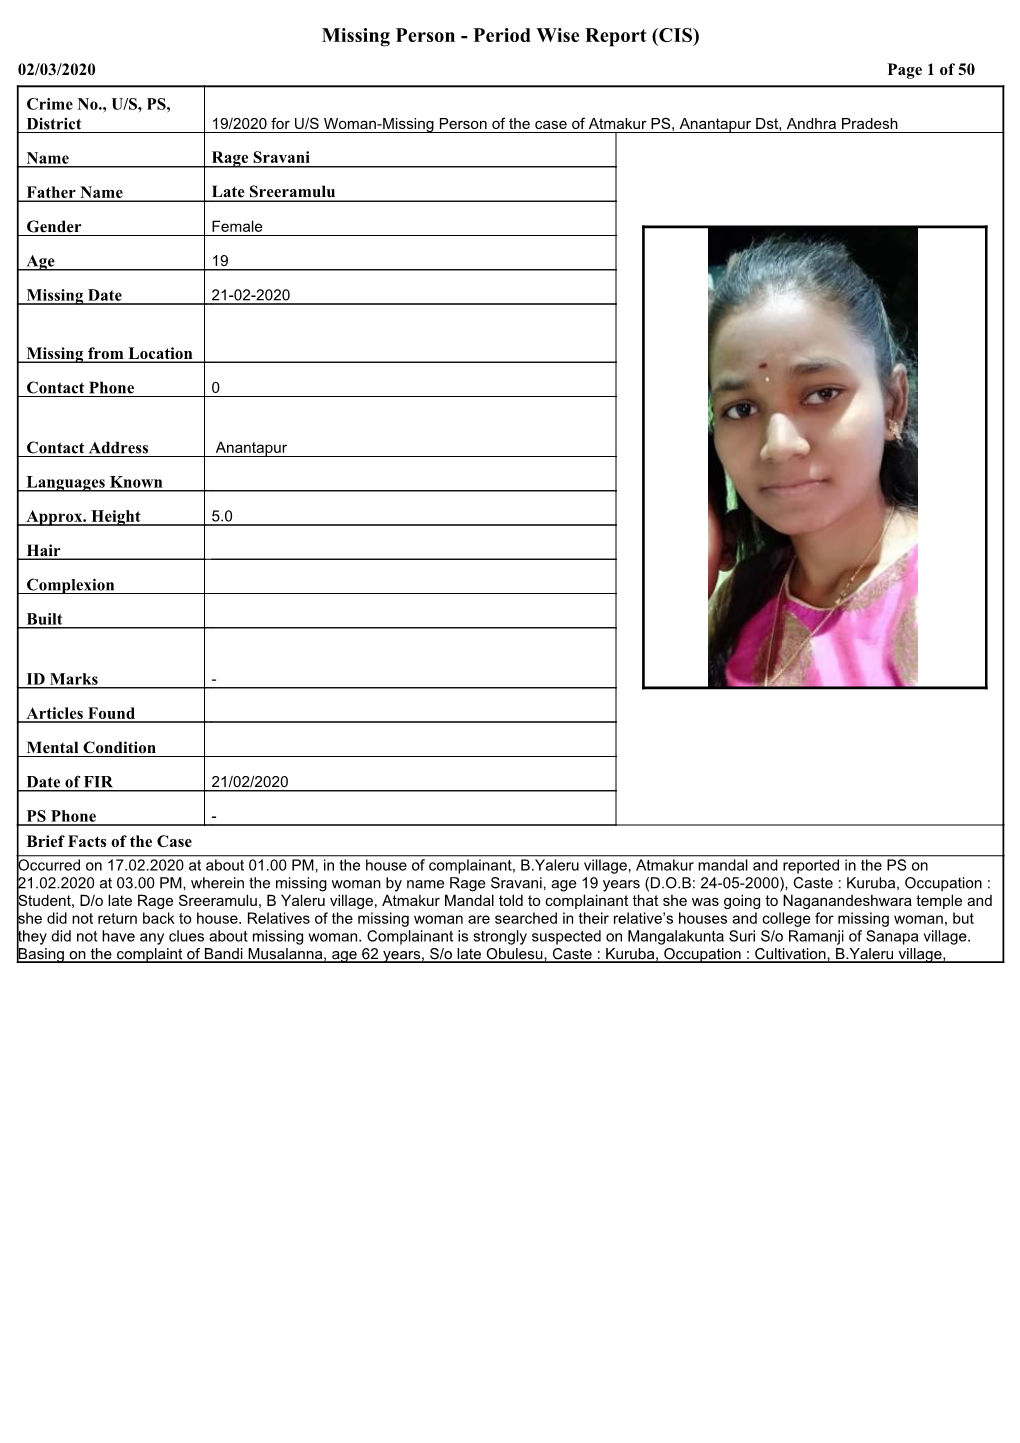 Missing Person - Period Wise Report (CIS) 02/03/2020 Page 1 of 50